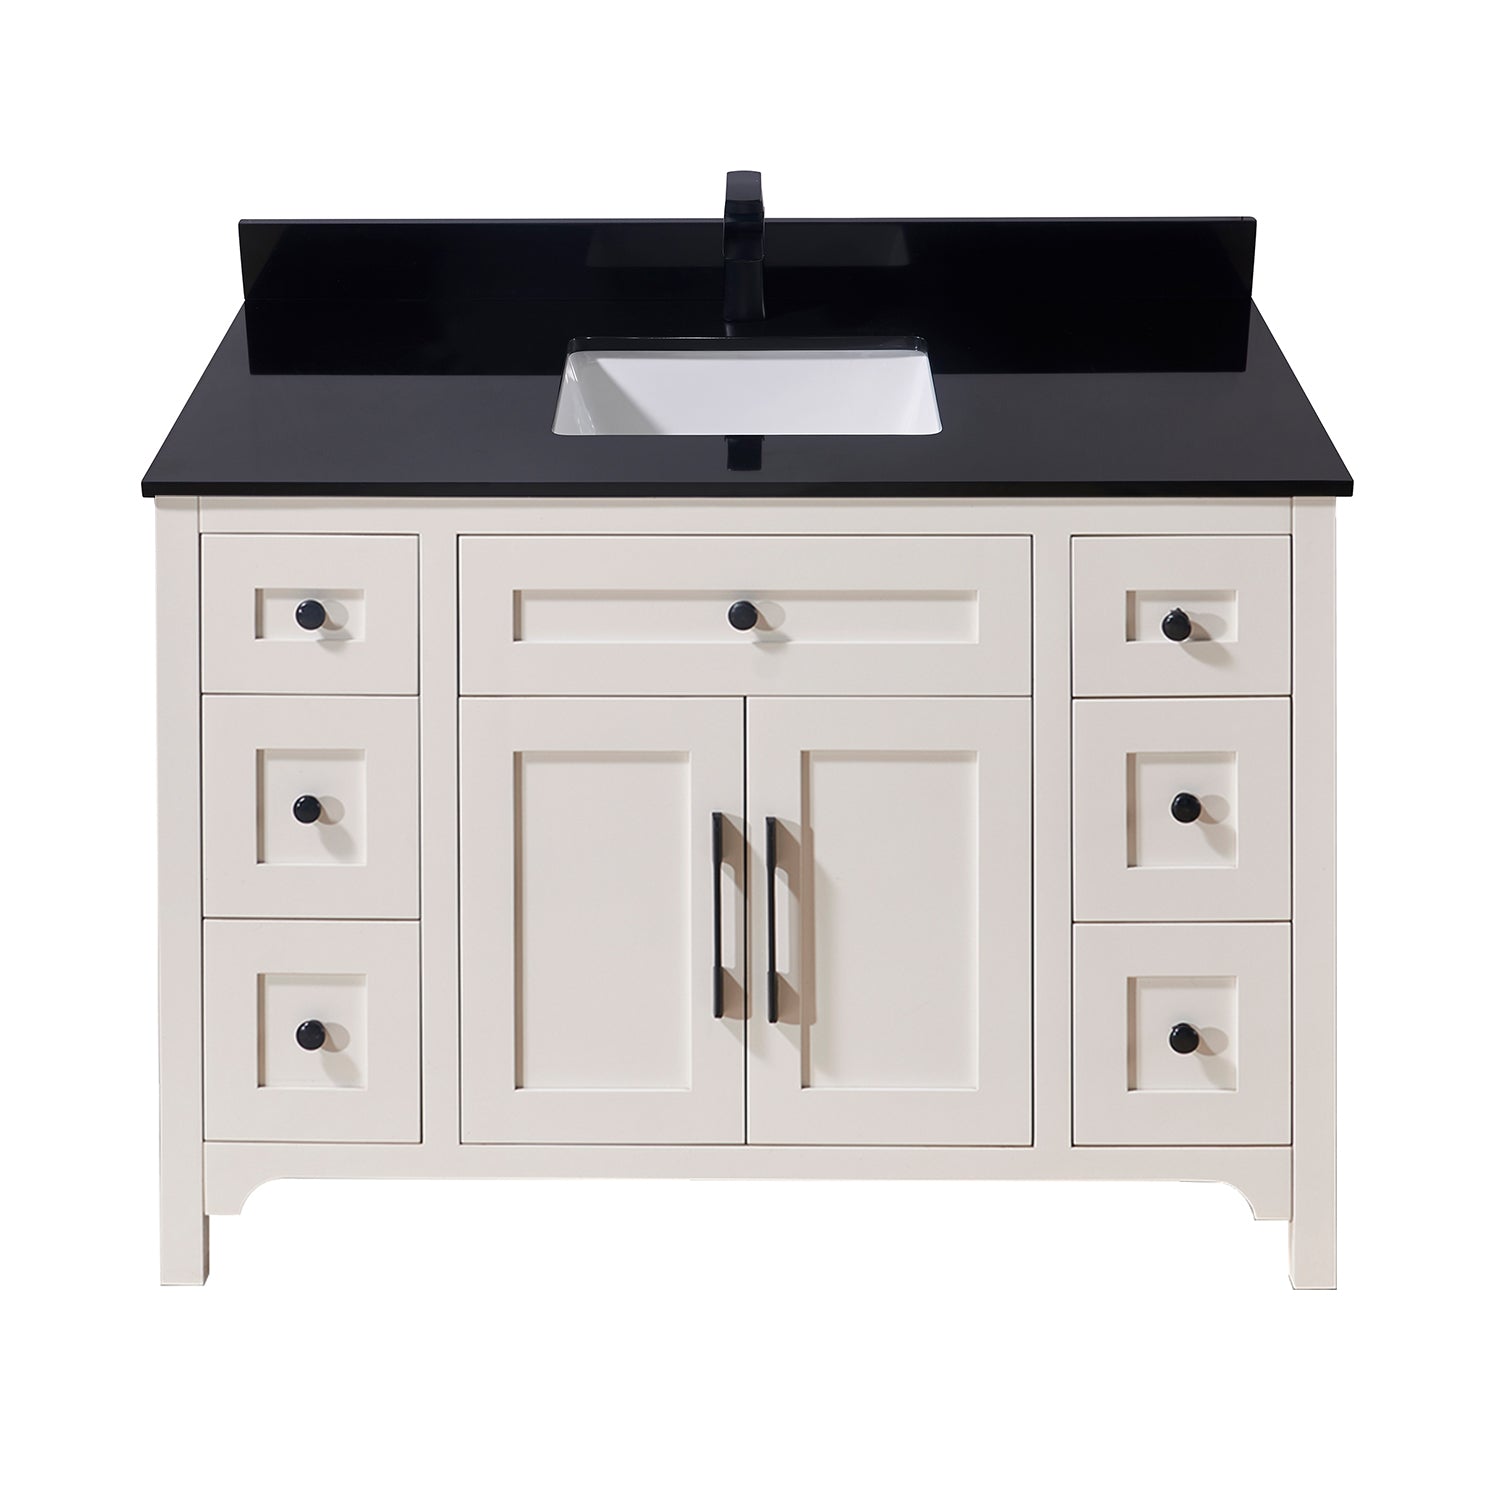 Feltre Stone effects Single Sink Vanity Top in Imperial Black with White Sink